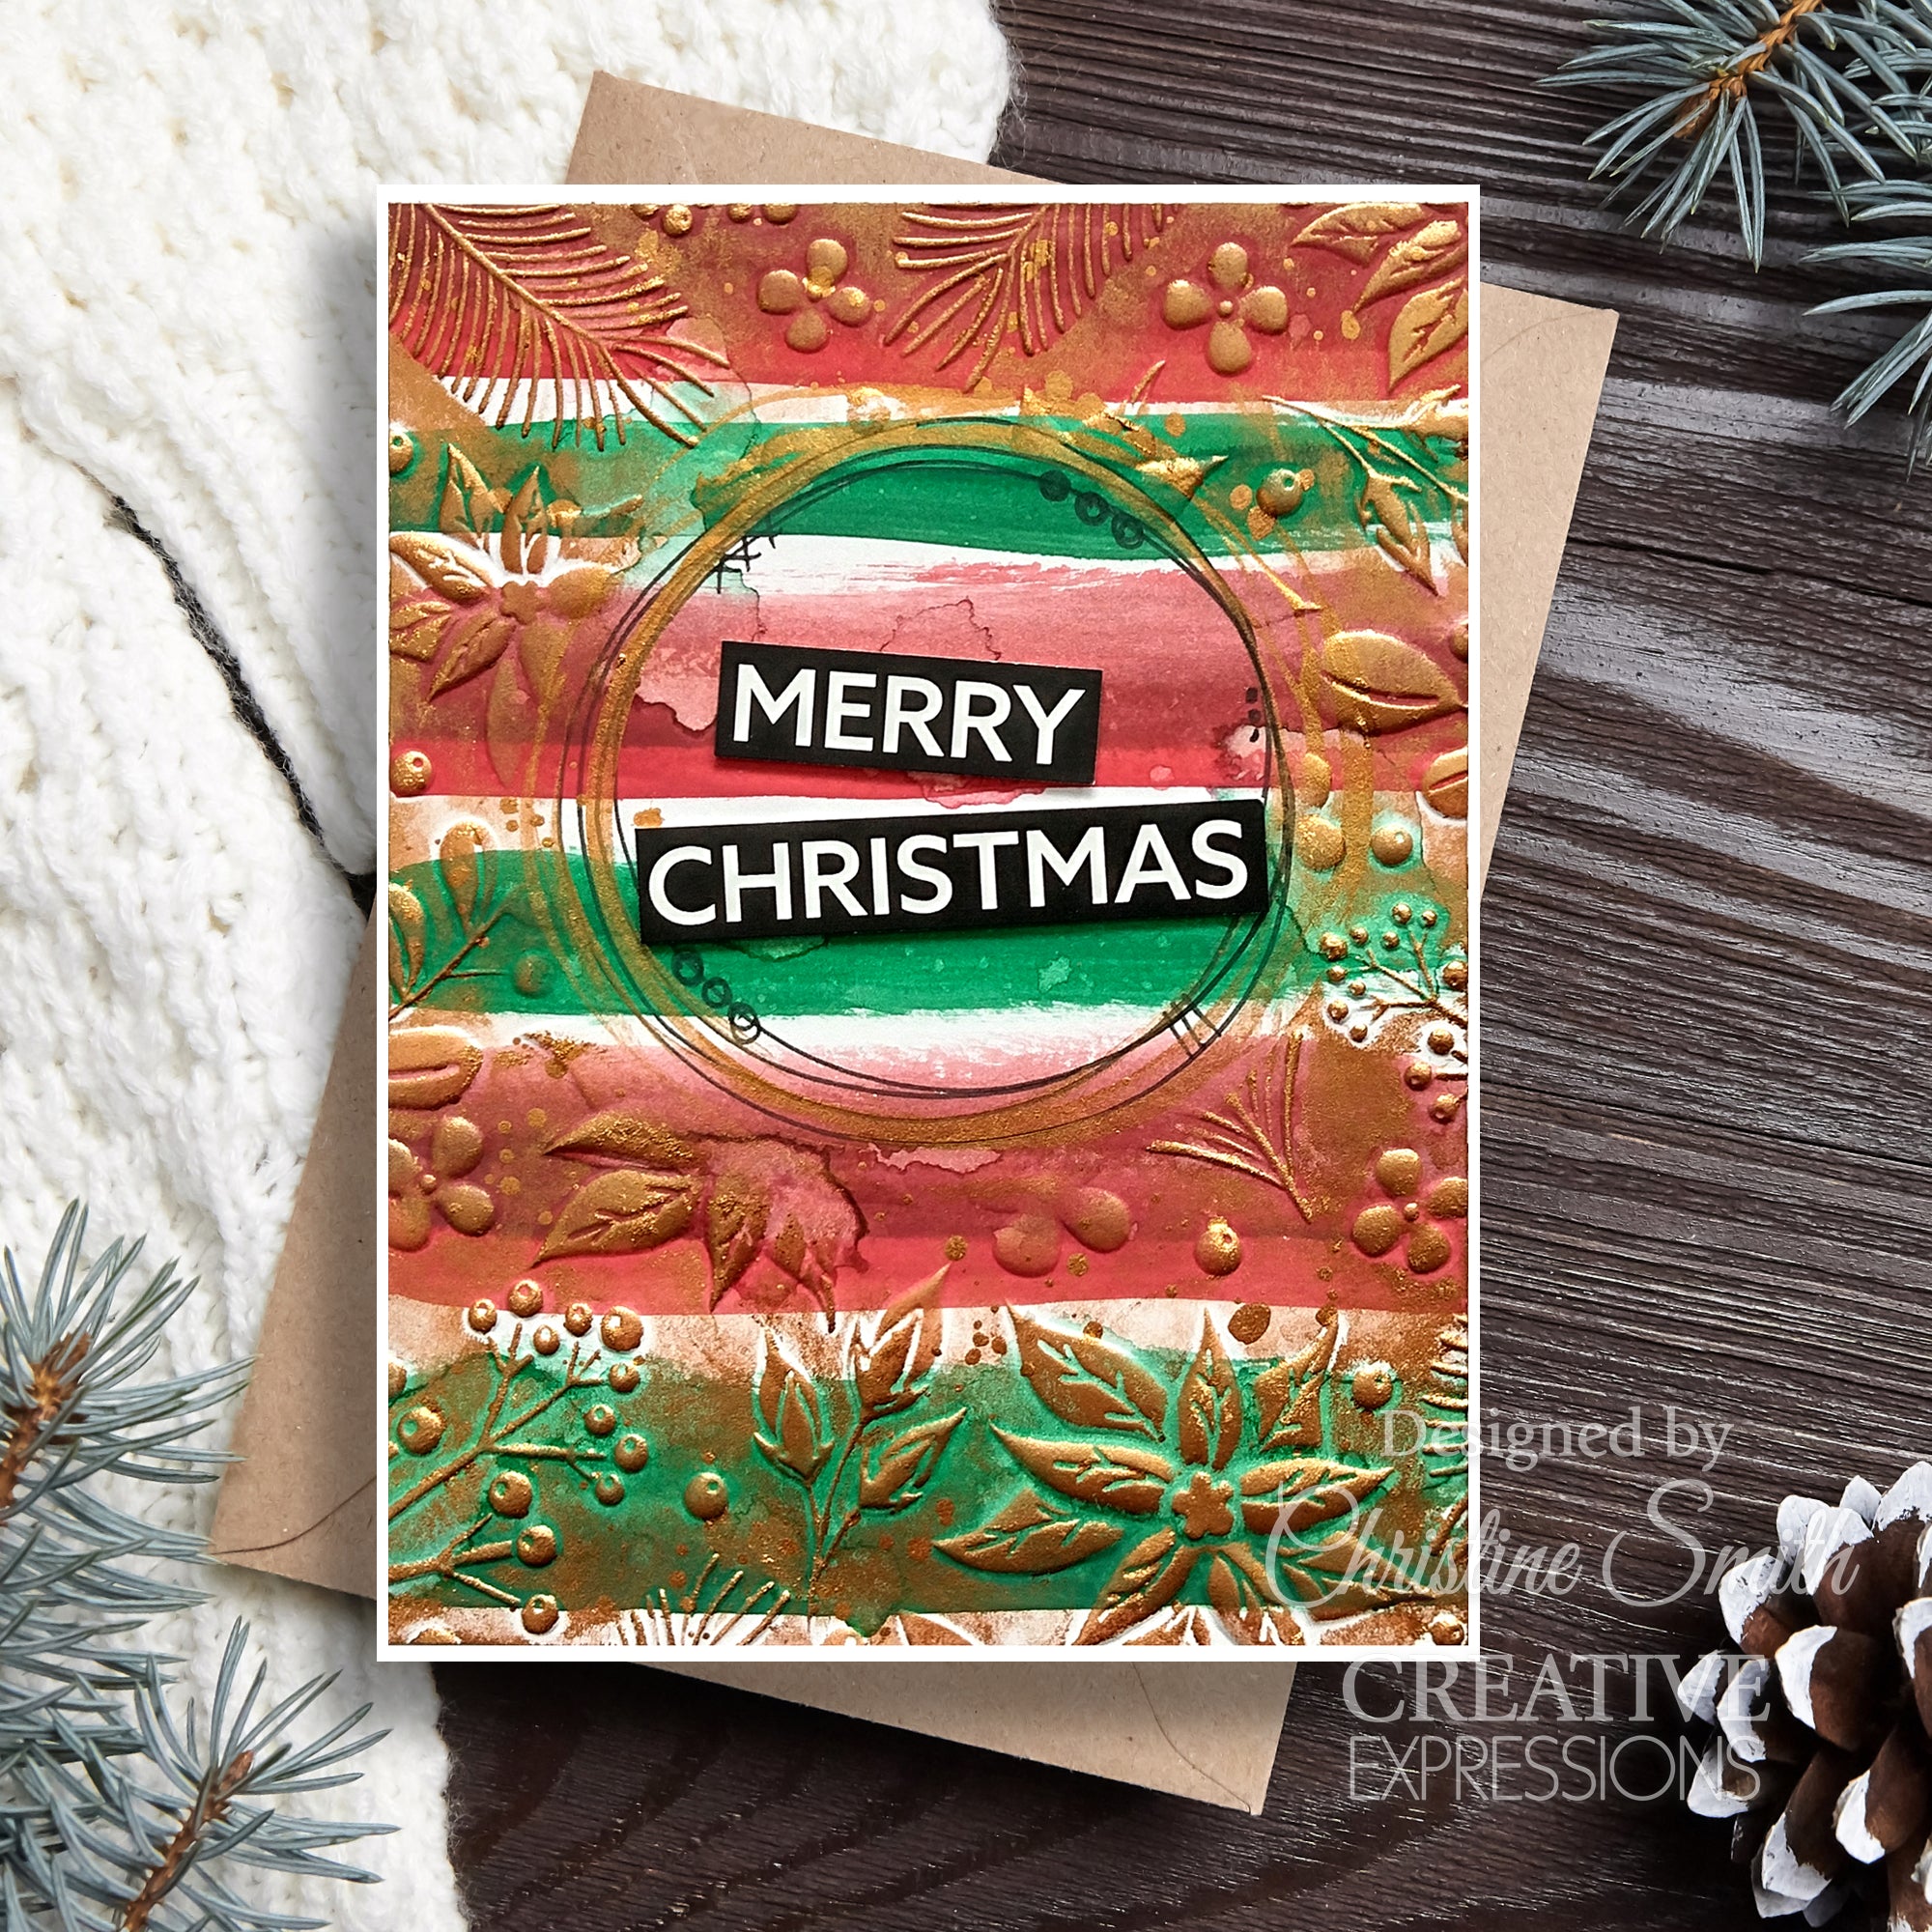 Creative Expressions Nature's Christmas Companion Colouring Stencil Set 6 in x 8 in 2pk